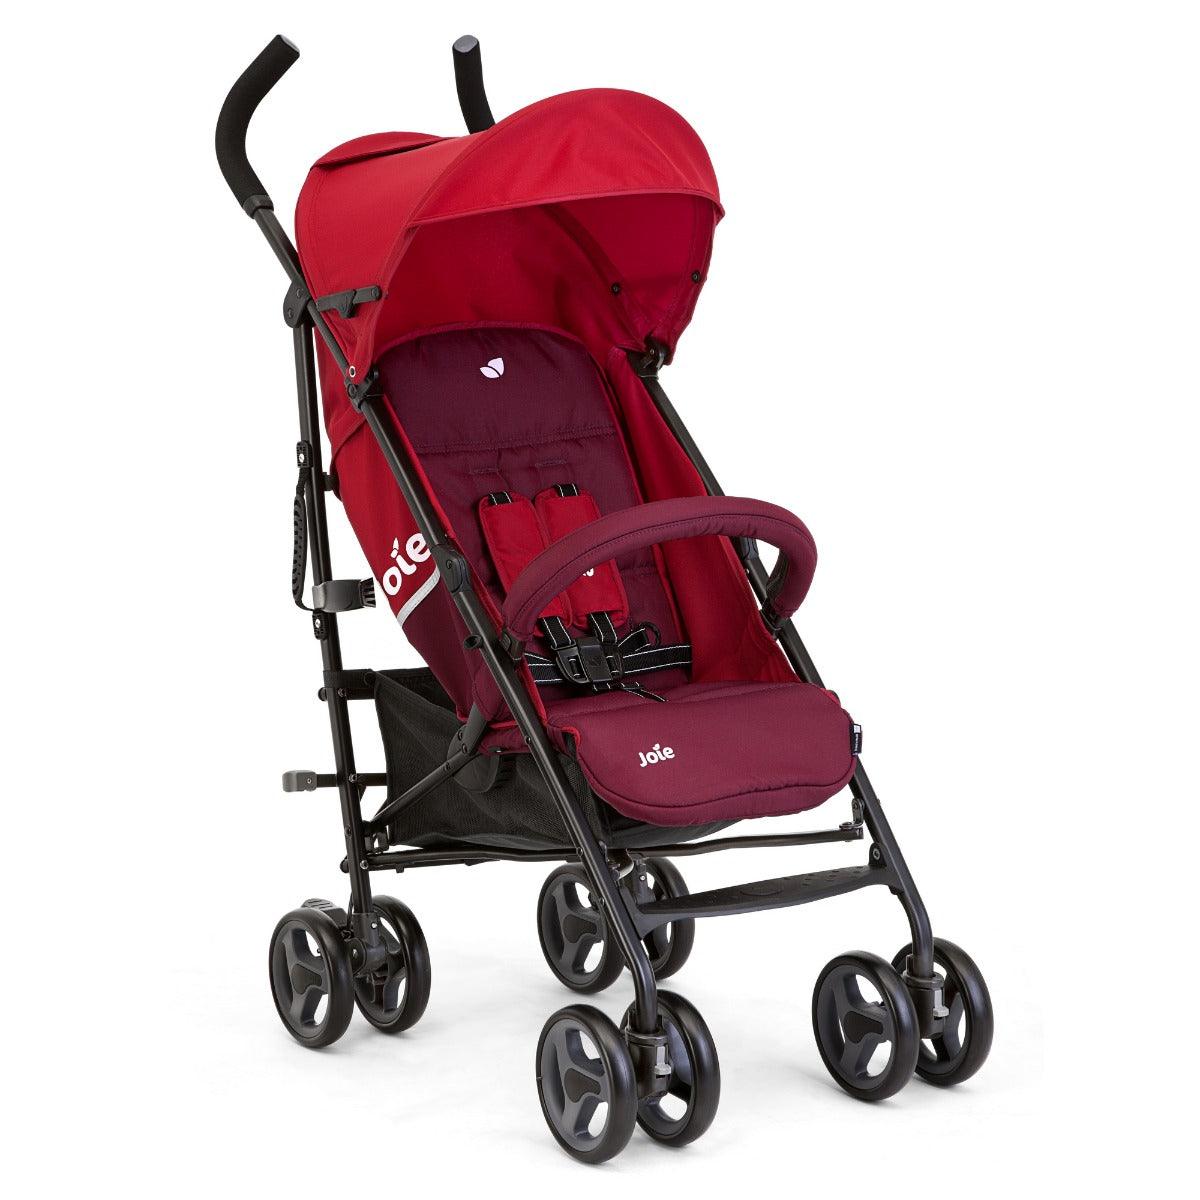 Joie Nitro LX Cherry - Baby Stroller Umbrella with Flat Reclining seat for Ages 0-3 Years